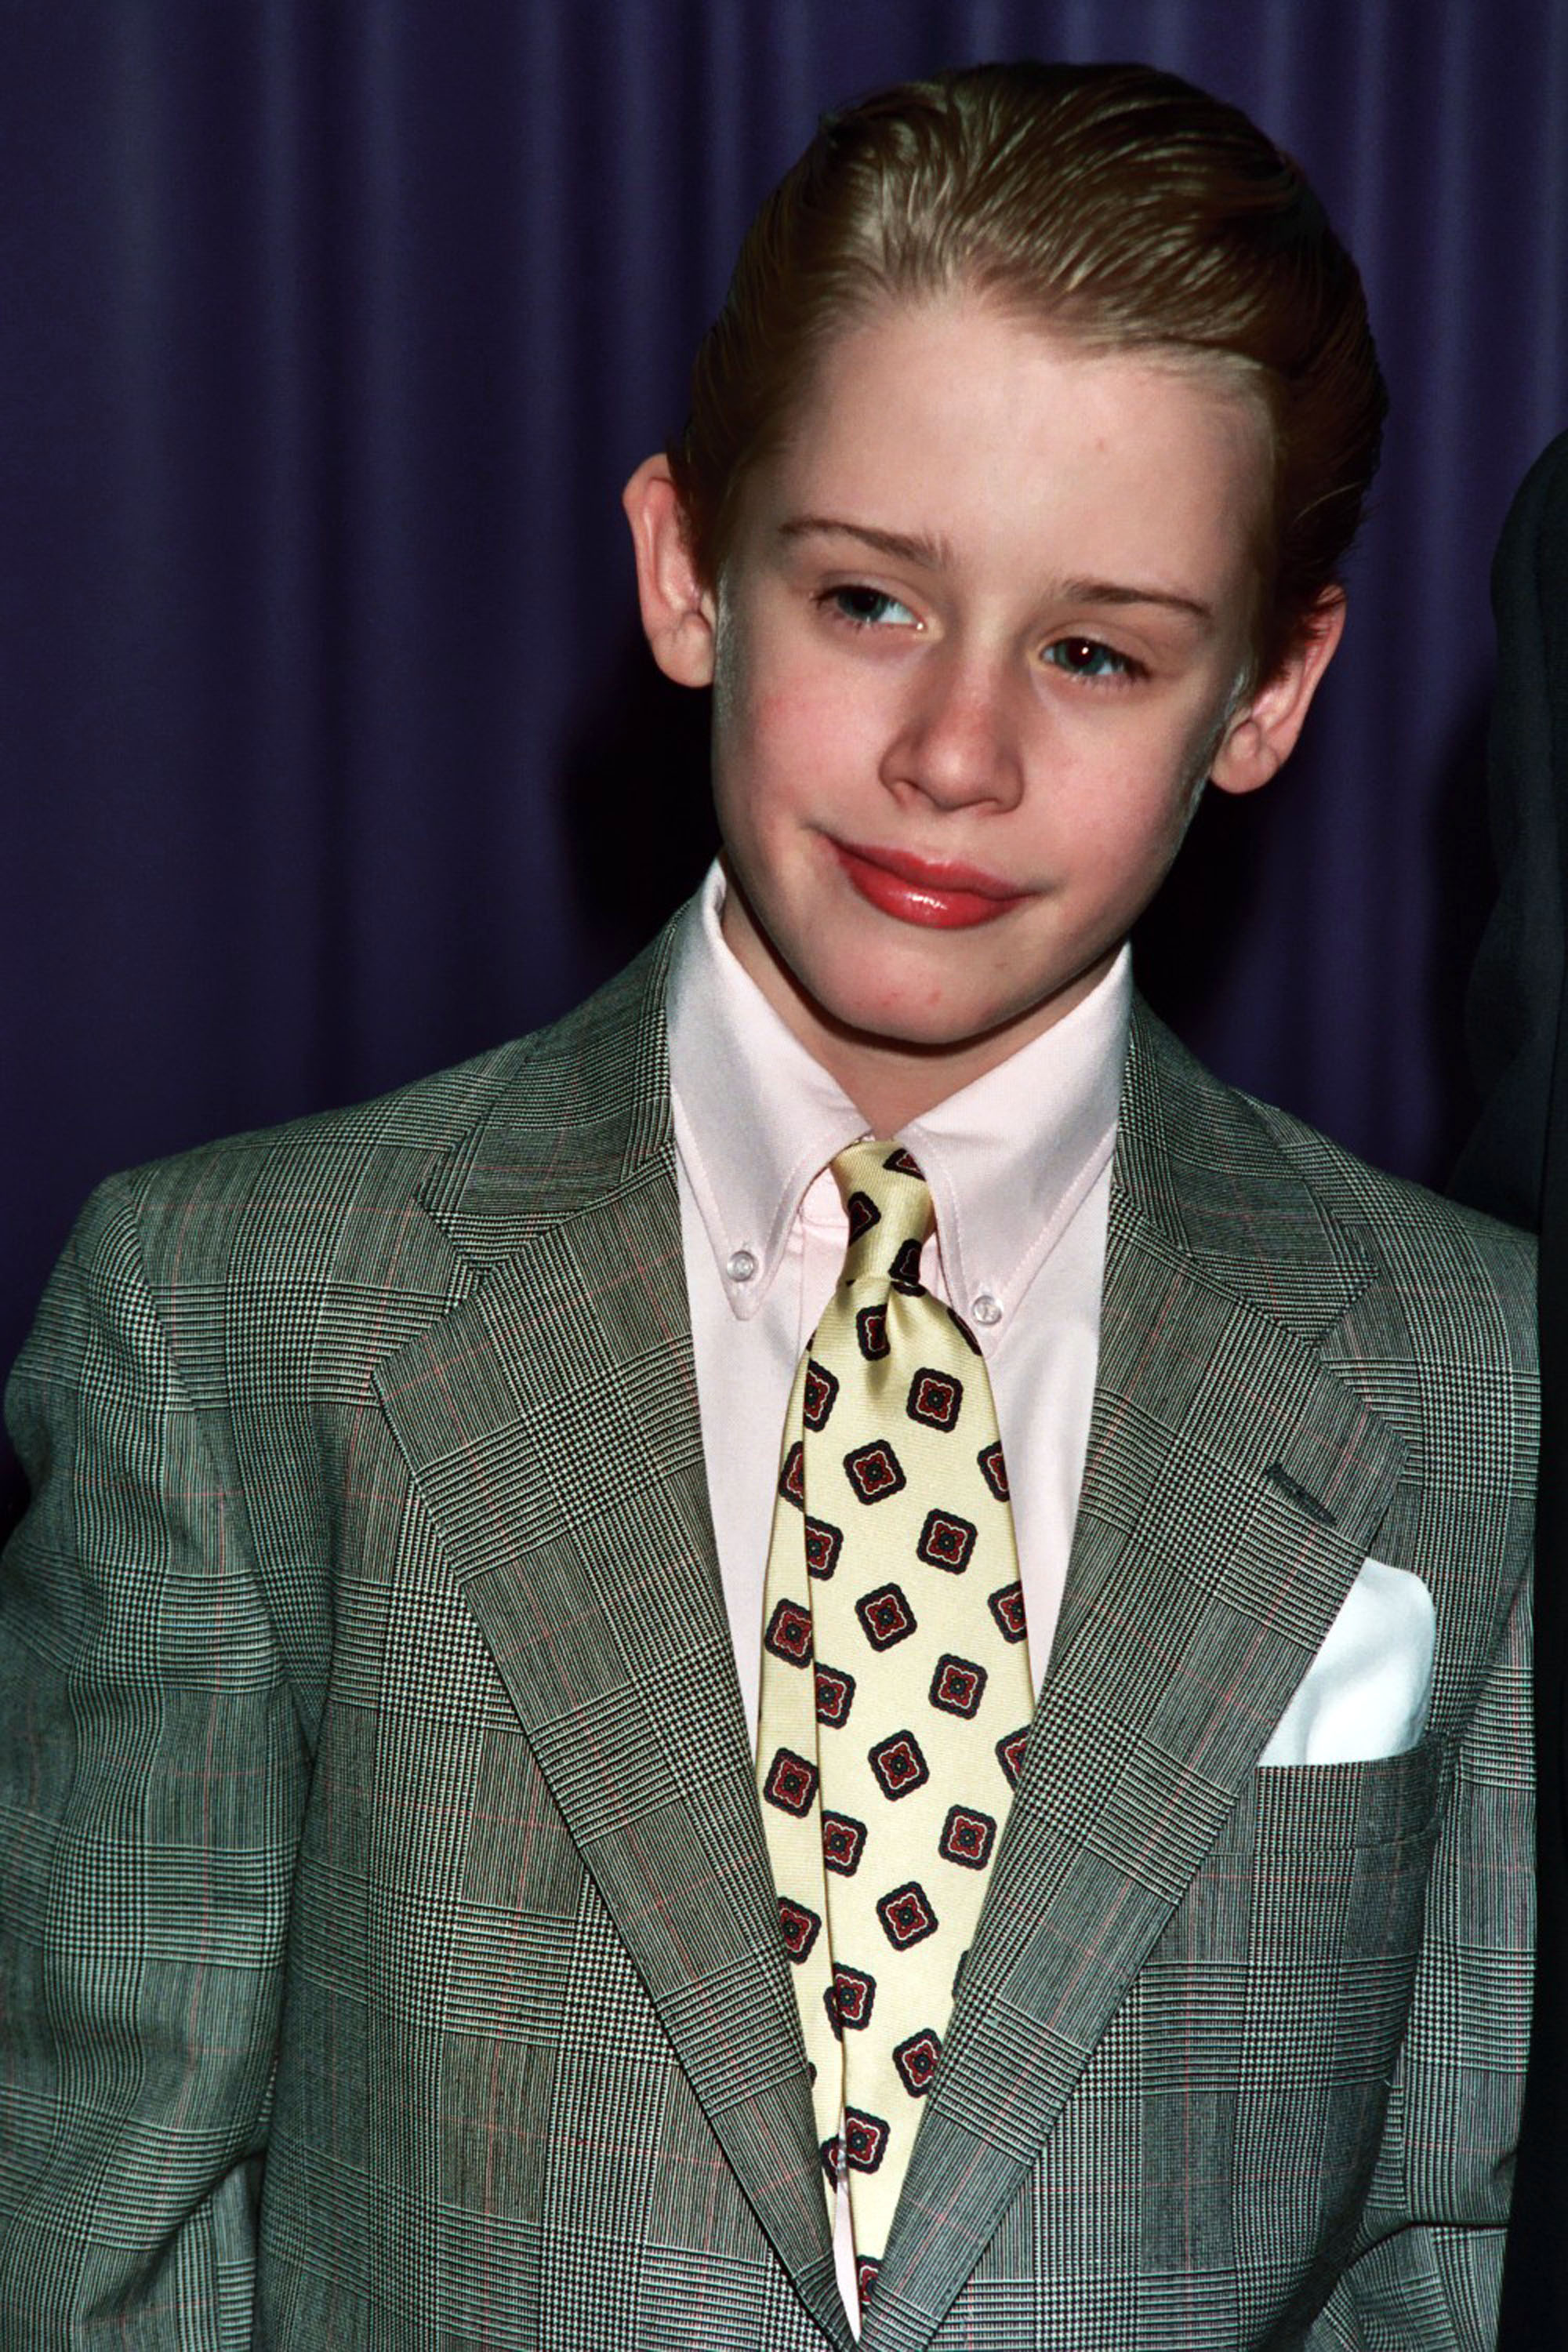 Macaulay Culkin at ShoWest in Las Vegas, Nevada in 1994. | Source: Getty Images